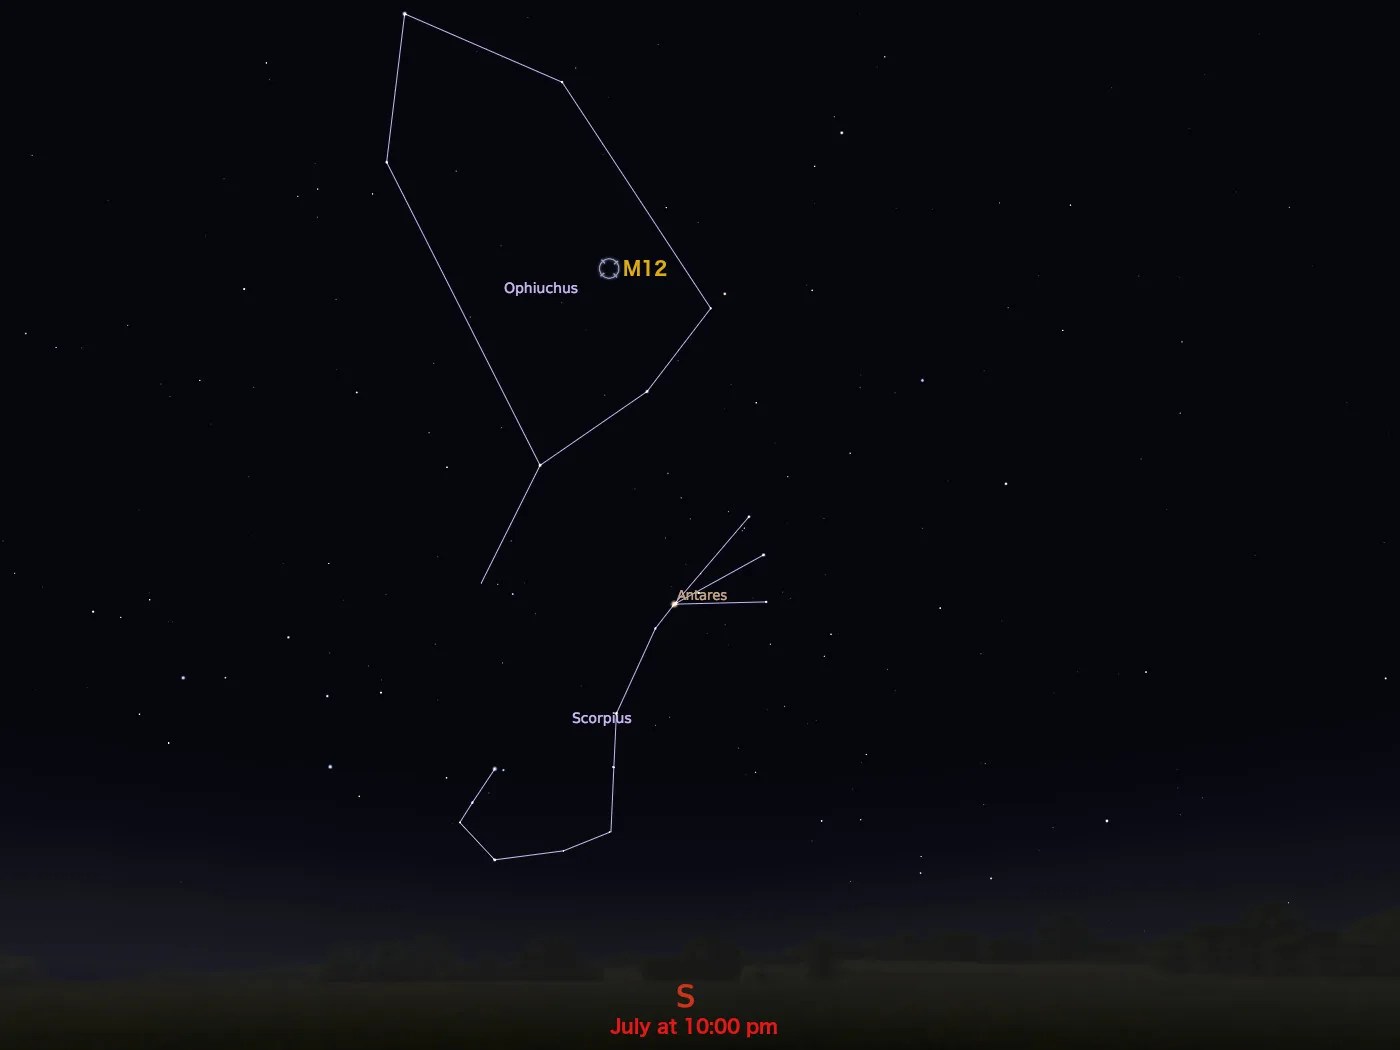 Locator sky chart for Messier 12. Black background with stars and constellation outlines. Constellations include Ophiuchus (top center) and Scorpius (bottom center).